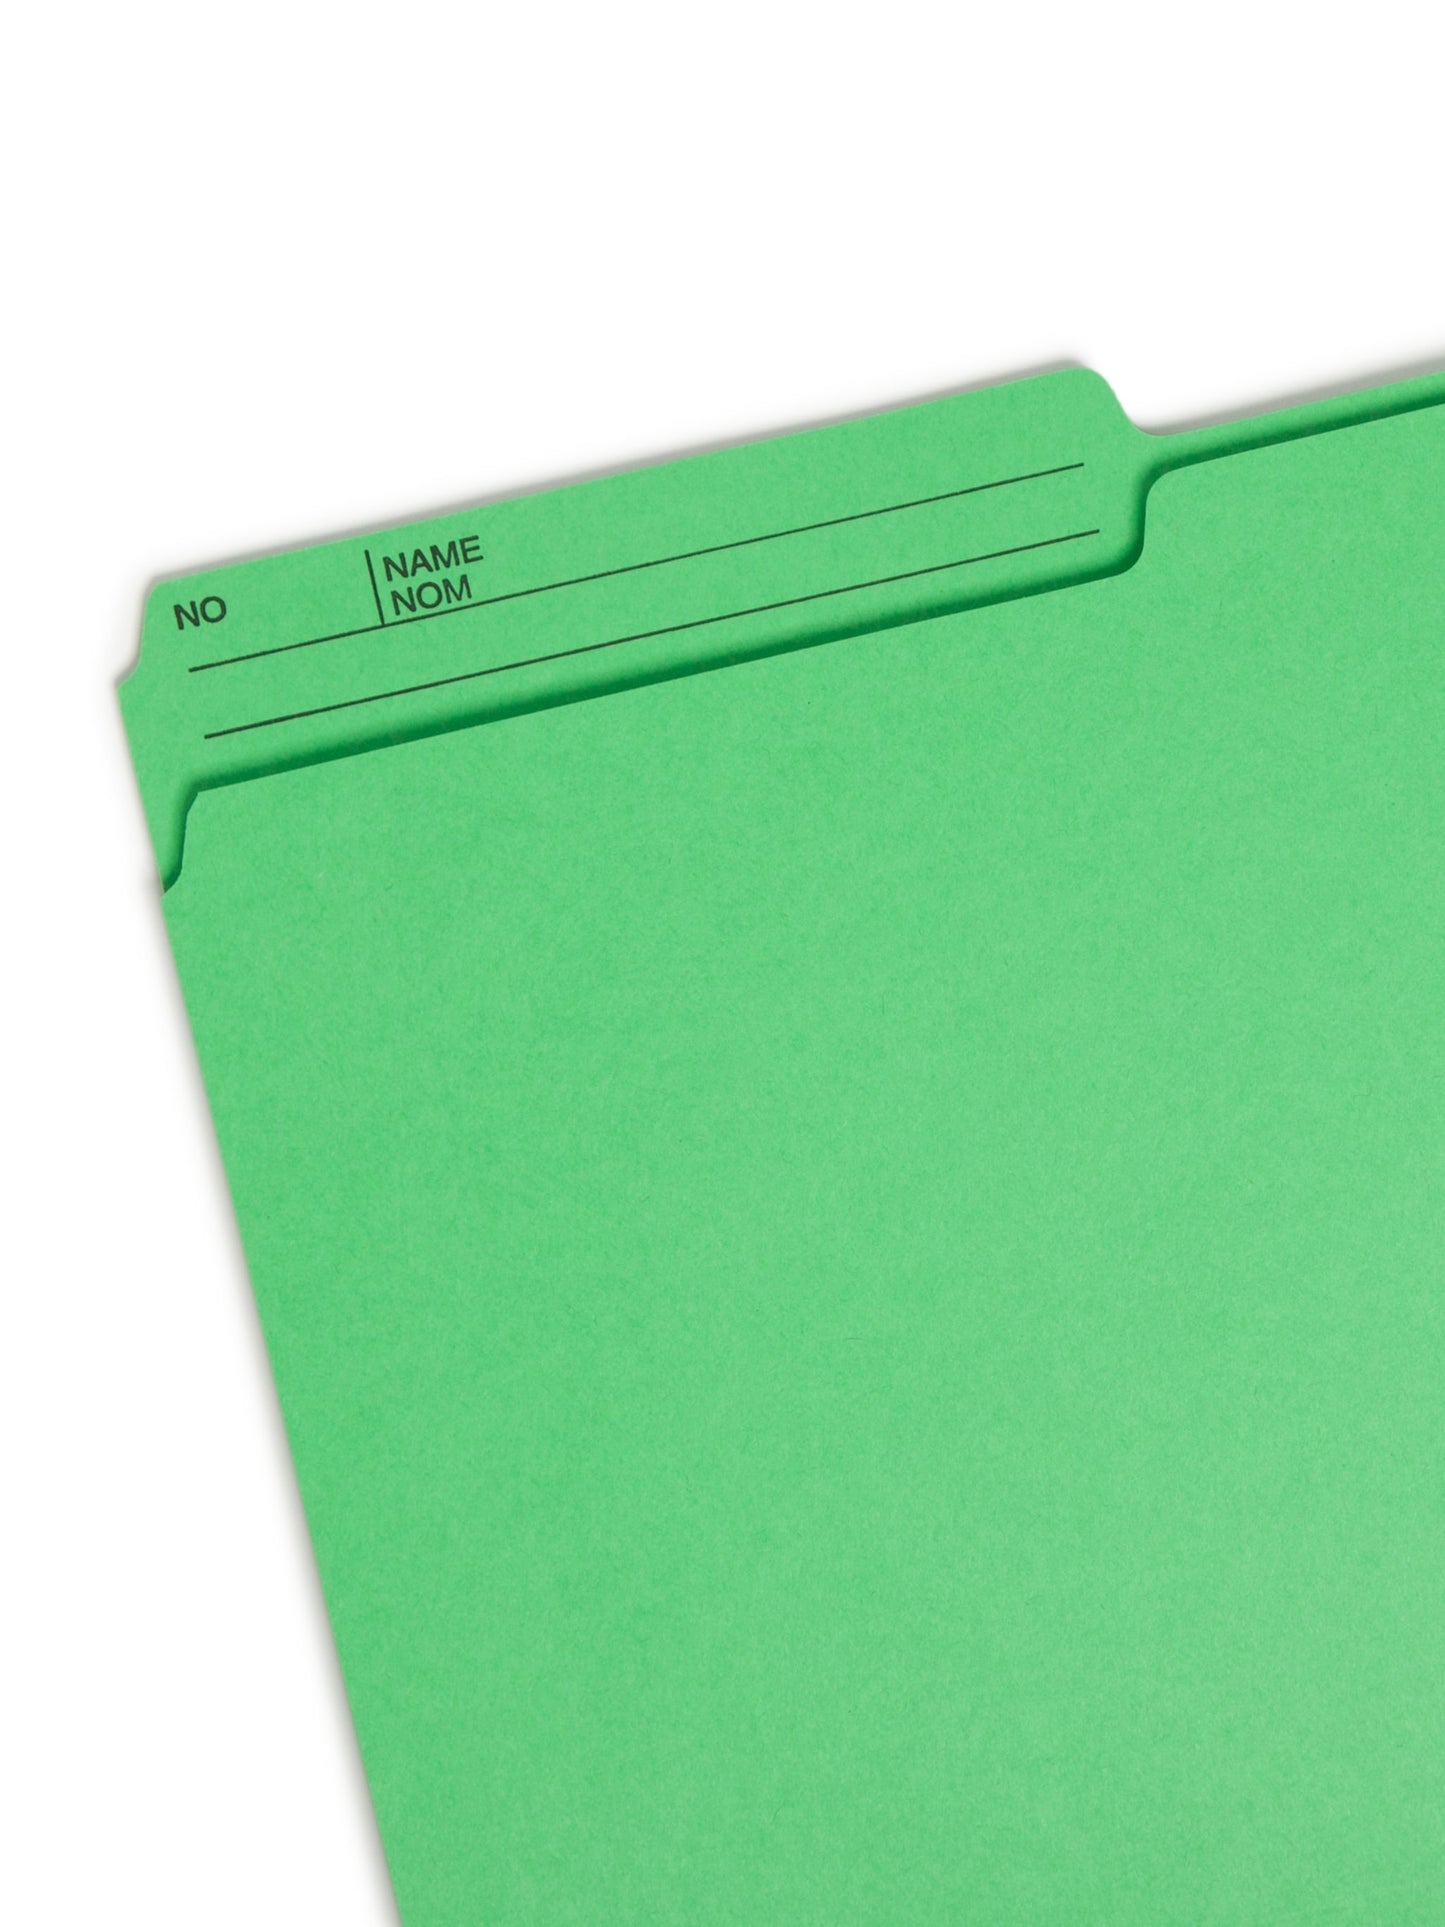 WaterShed®/CutLess® Reversible Printed Tab File Folders, Assorted Colors Color, Letter Size, 086486119580